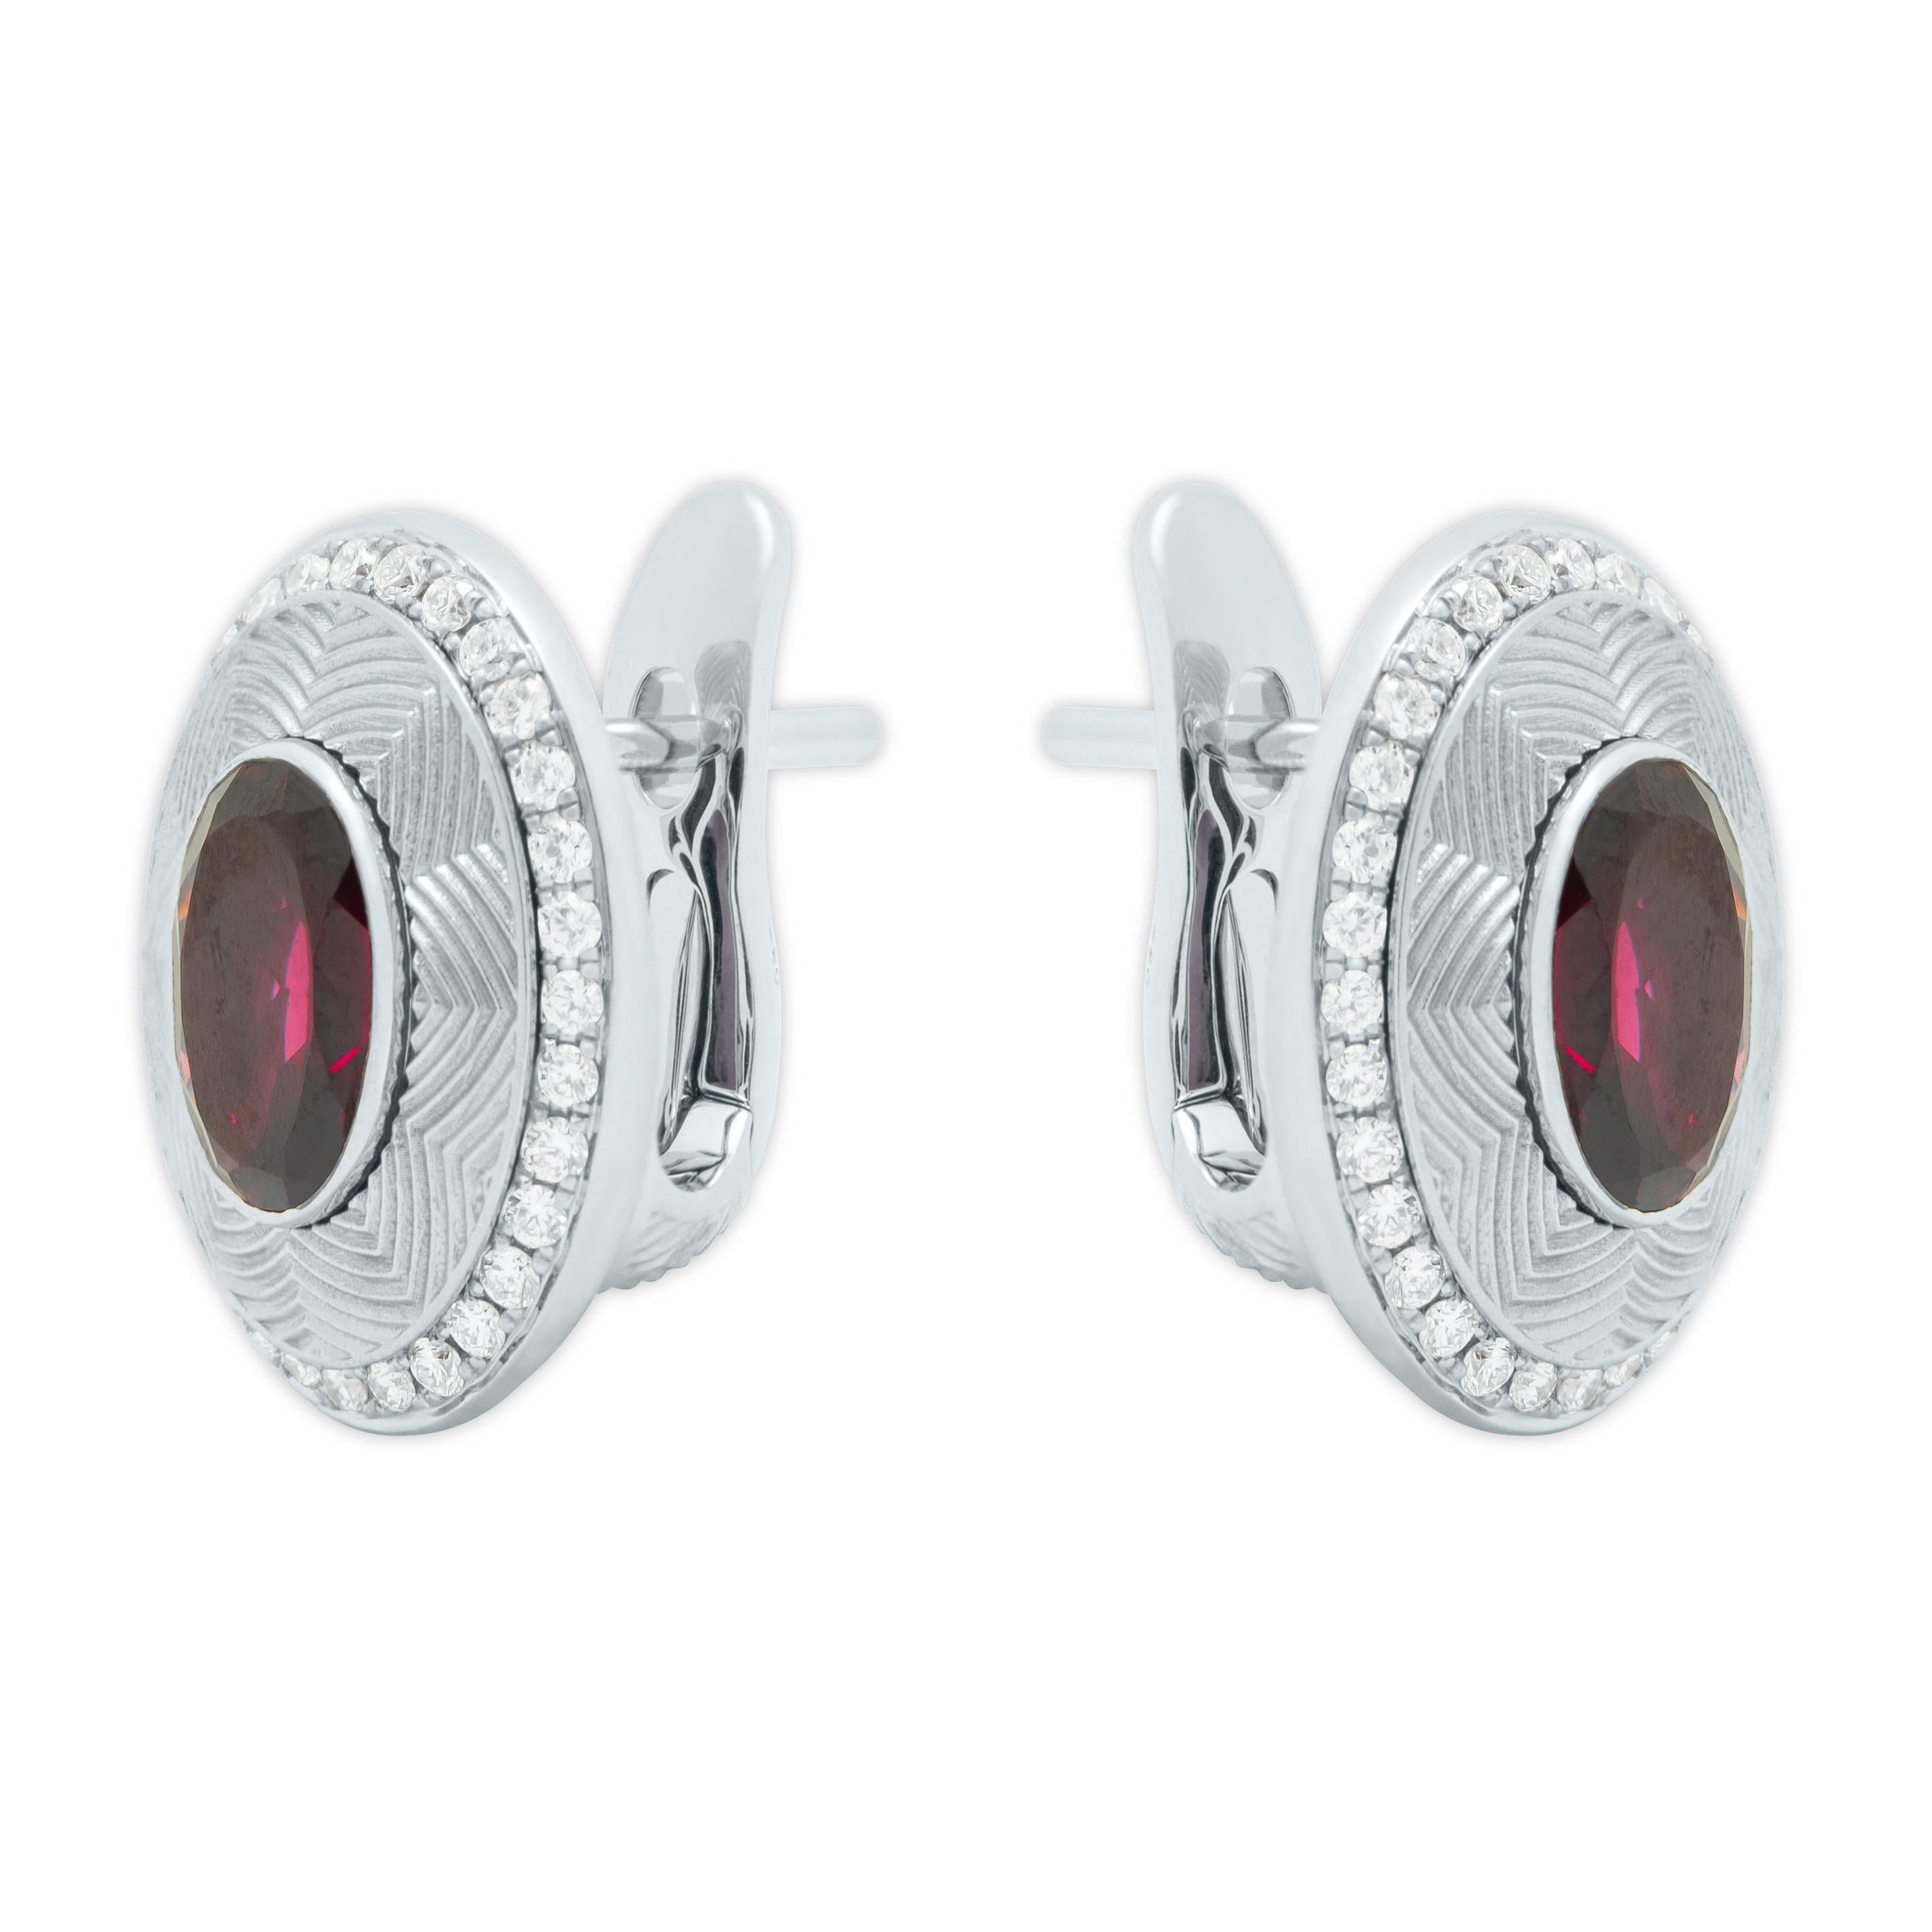 Rhodolite 2.97 Carat Diamonds 18 Karat White Gold Tweed Earrings
Perhaps this is the brightest and most popular representative of the Pret-a-Porter collection. The texture of Tweed reminds of the well-known fabric, but most importantly, it reminds